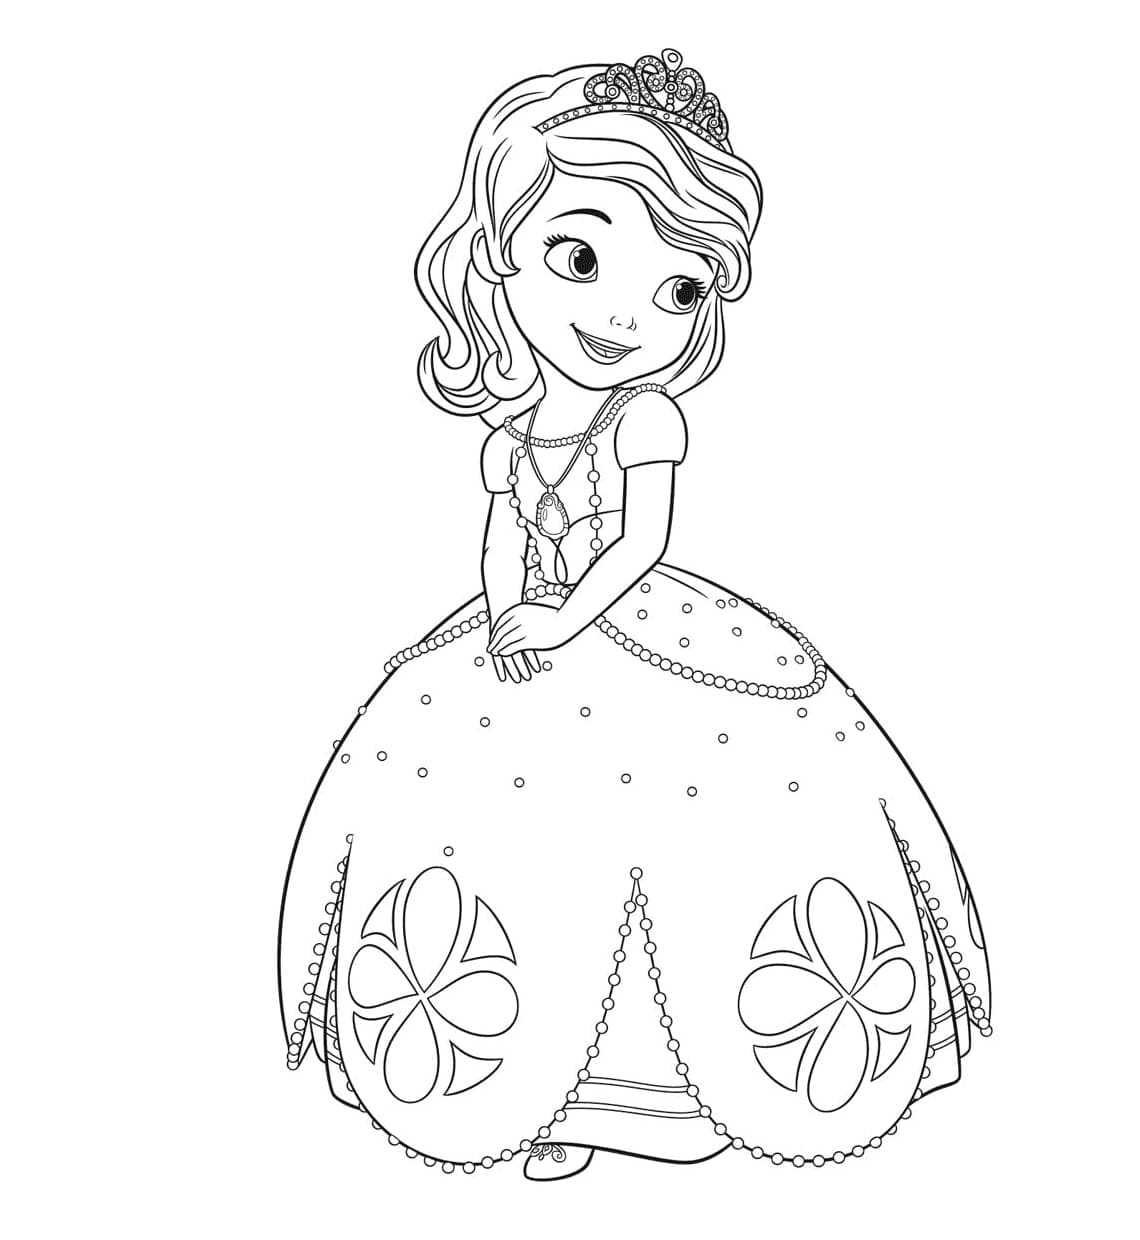 Coloring page Sofia the First Princess in a dress